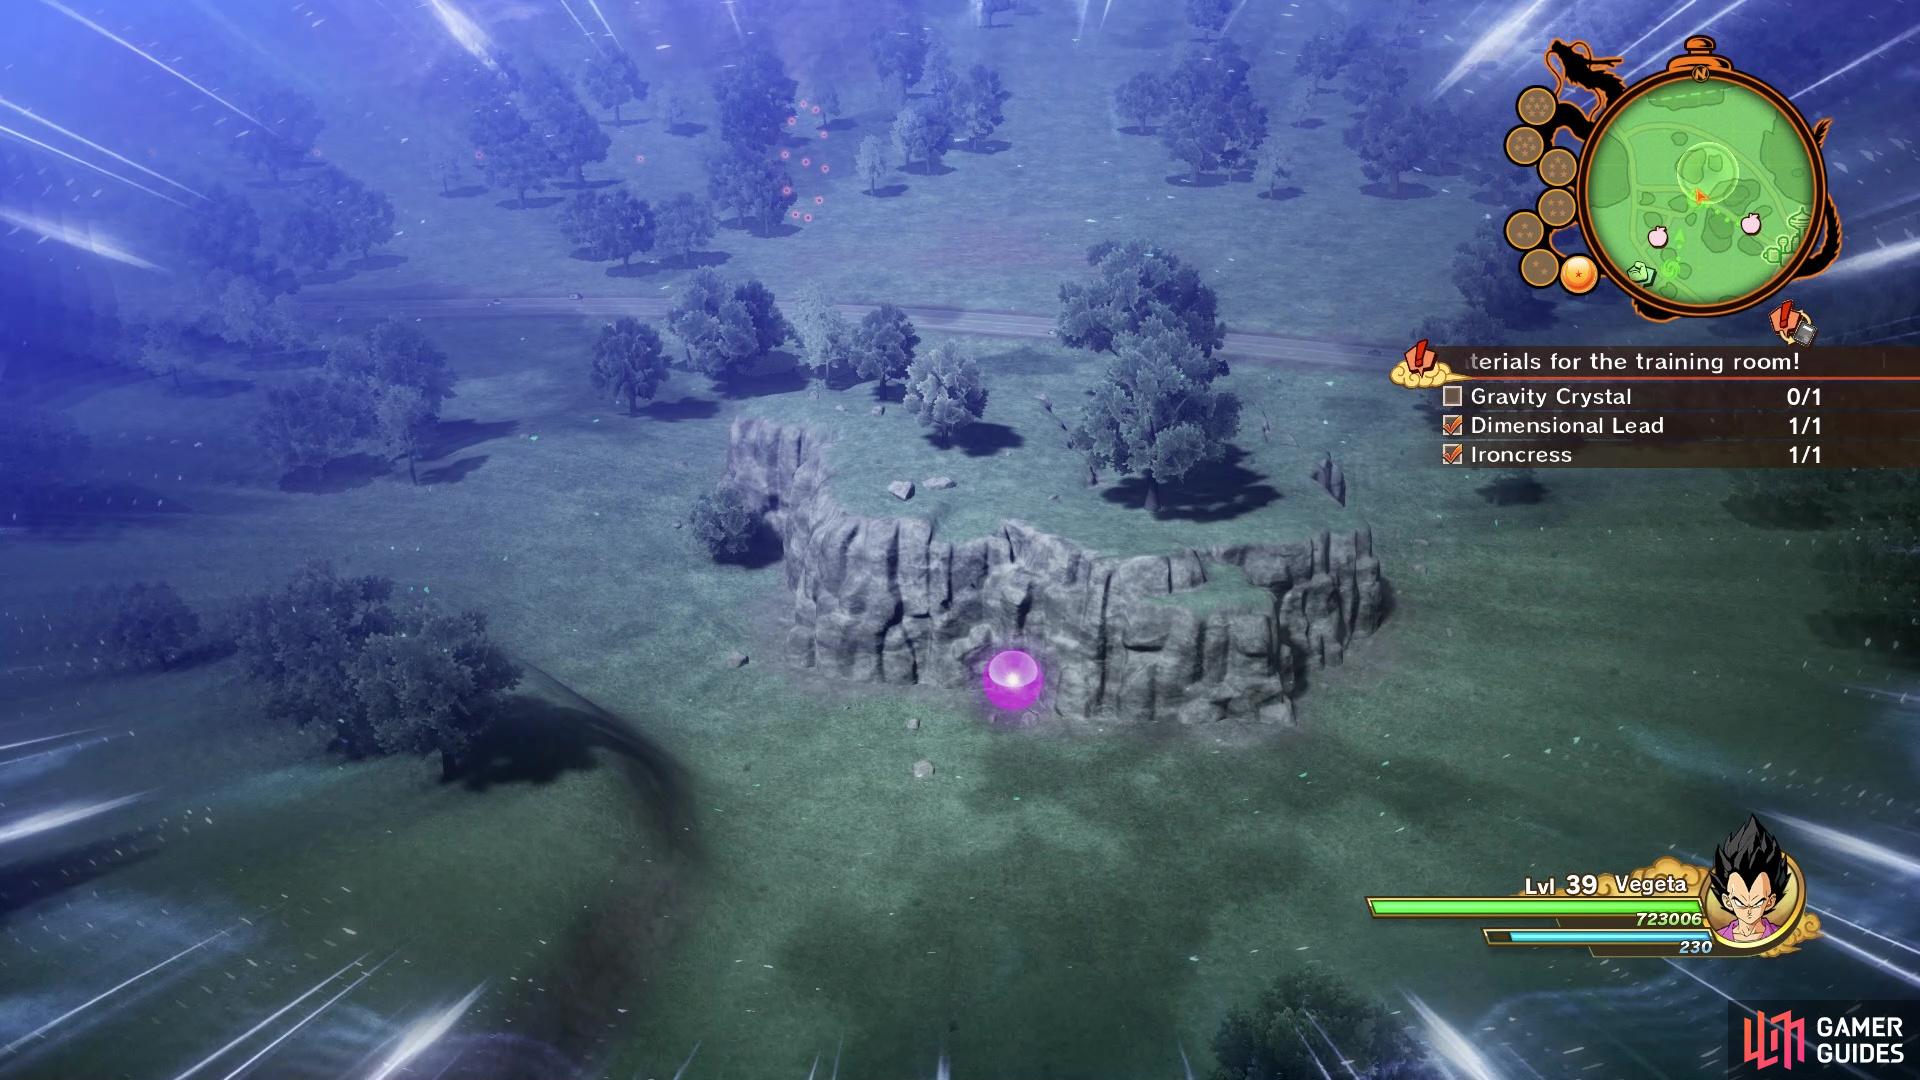 The location of the Gravity Crystal item